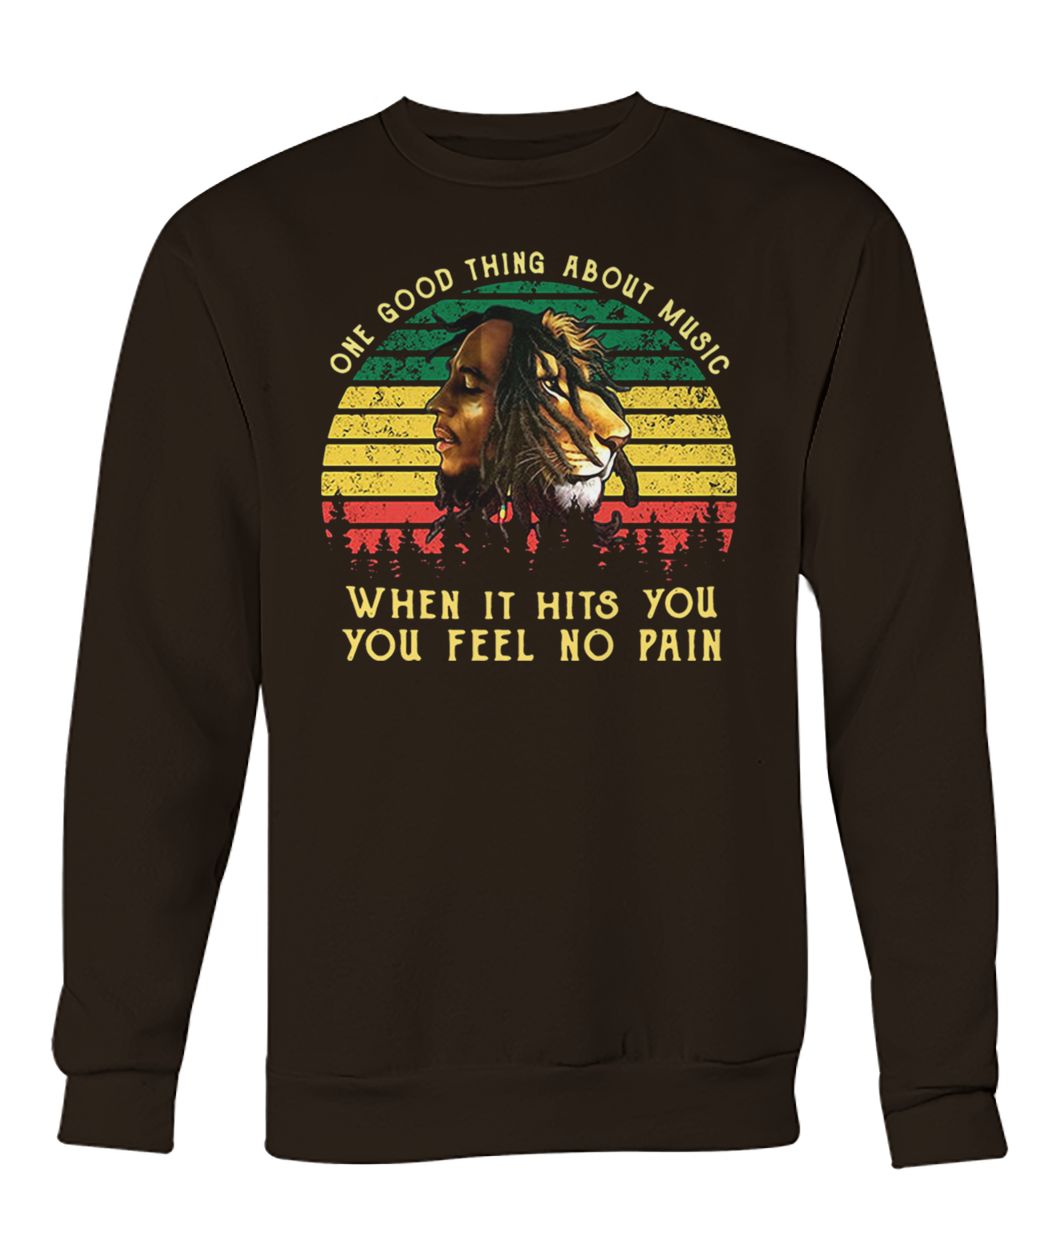 Vintage bob marley iron lion zion one good thing about music when it hits you you feel no pain crew neck sweatshirt